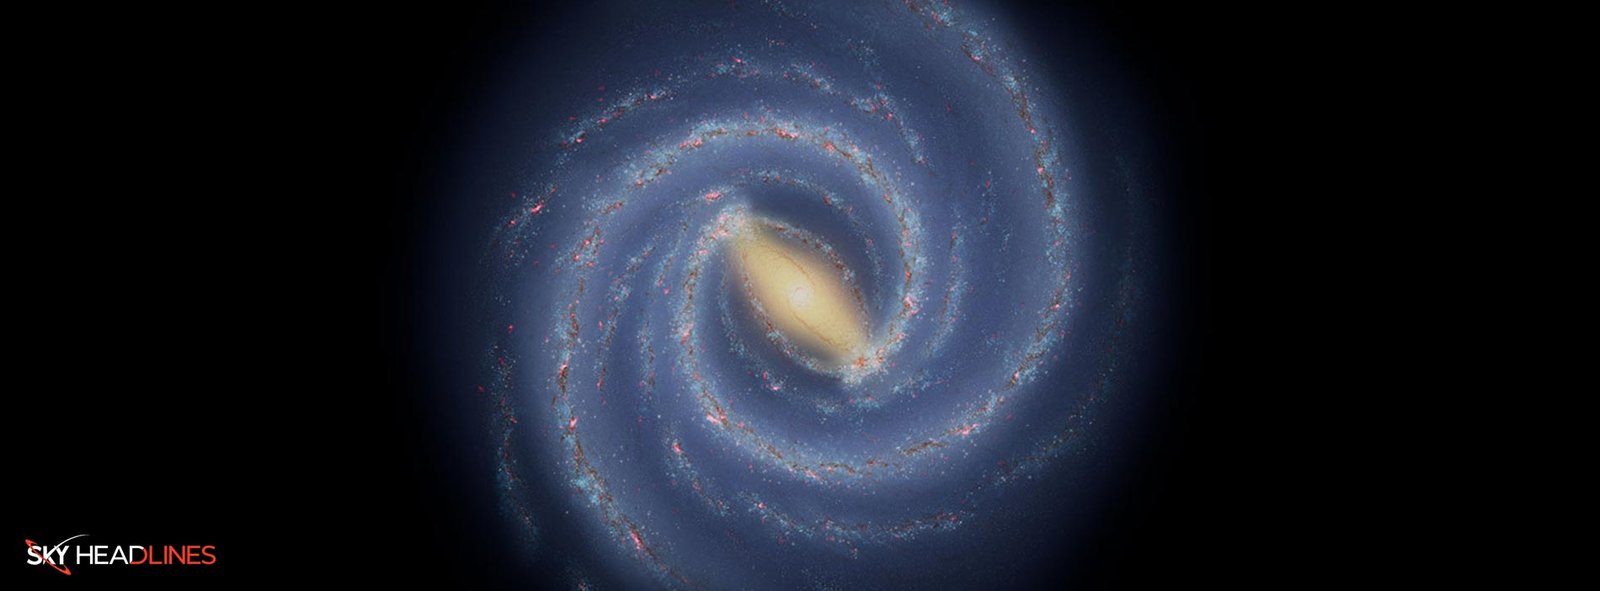 Spiral Arms